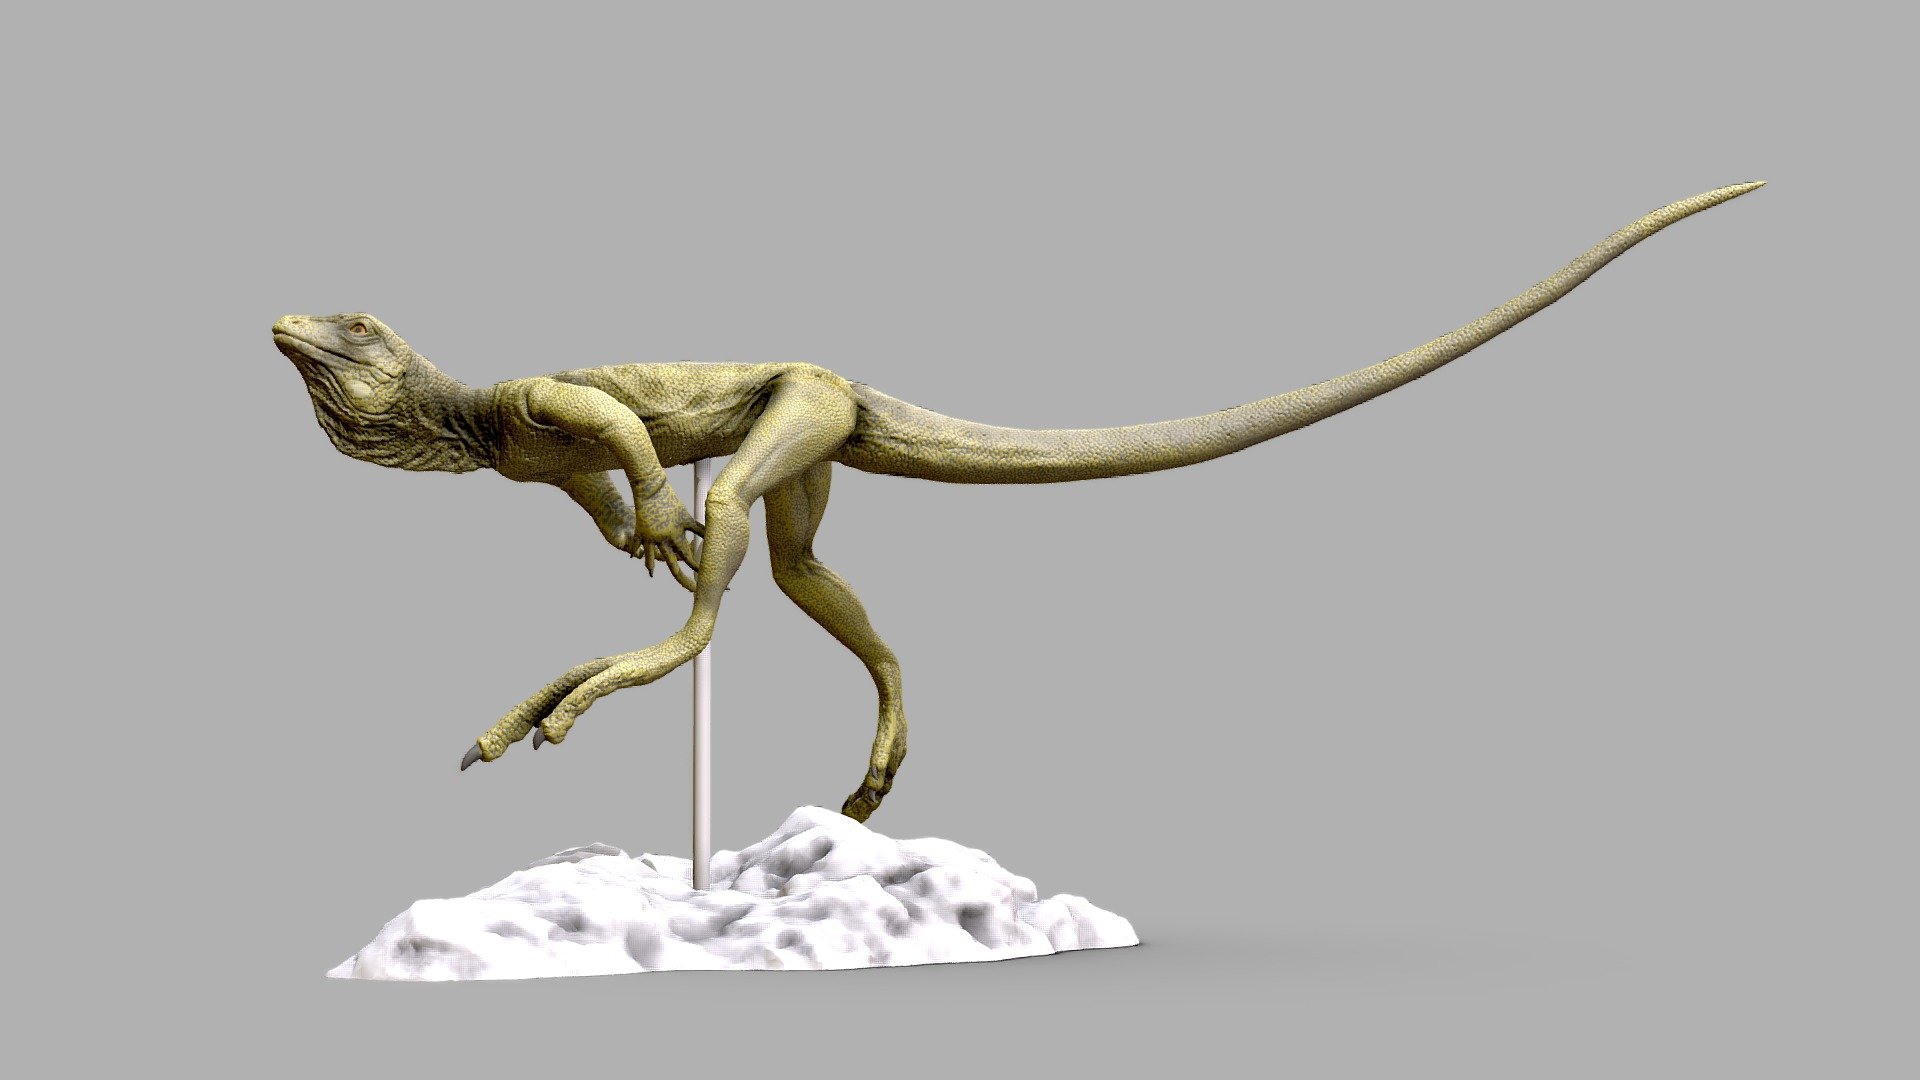 The eudibamus was a small biped parareptile from the early permian. It was unique due to it's considerd way of running or jumping. 

3D Print files for resin printing (Recommended). High quality highpoly files included in additional folder. 

**
Product information:**




STL files for 3D printing

Sliced in multiple pieces

If you don't have a resin printer, you can buy this file and ask My Dinocave to print it  (EU Preffered) 
https://www.facebook.com/mydinocave/

Model Sculpted by Rick Stikkelorum - Eudibamus for 3D Printing - Buy Royalty Free 3D model by RickStikkelorum (@ricksticky) 3d model